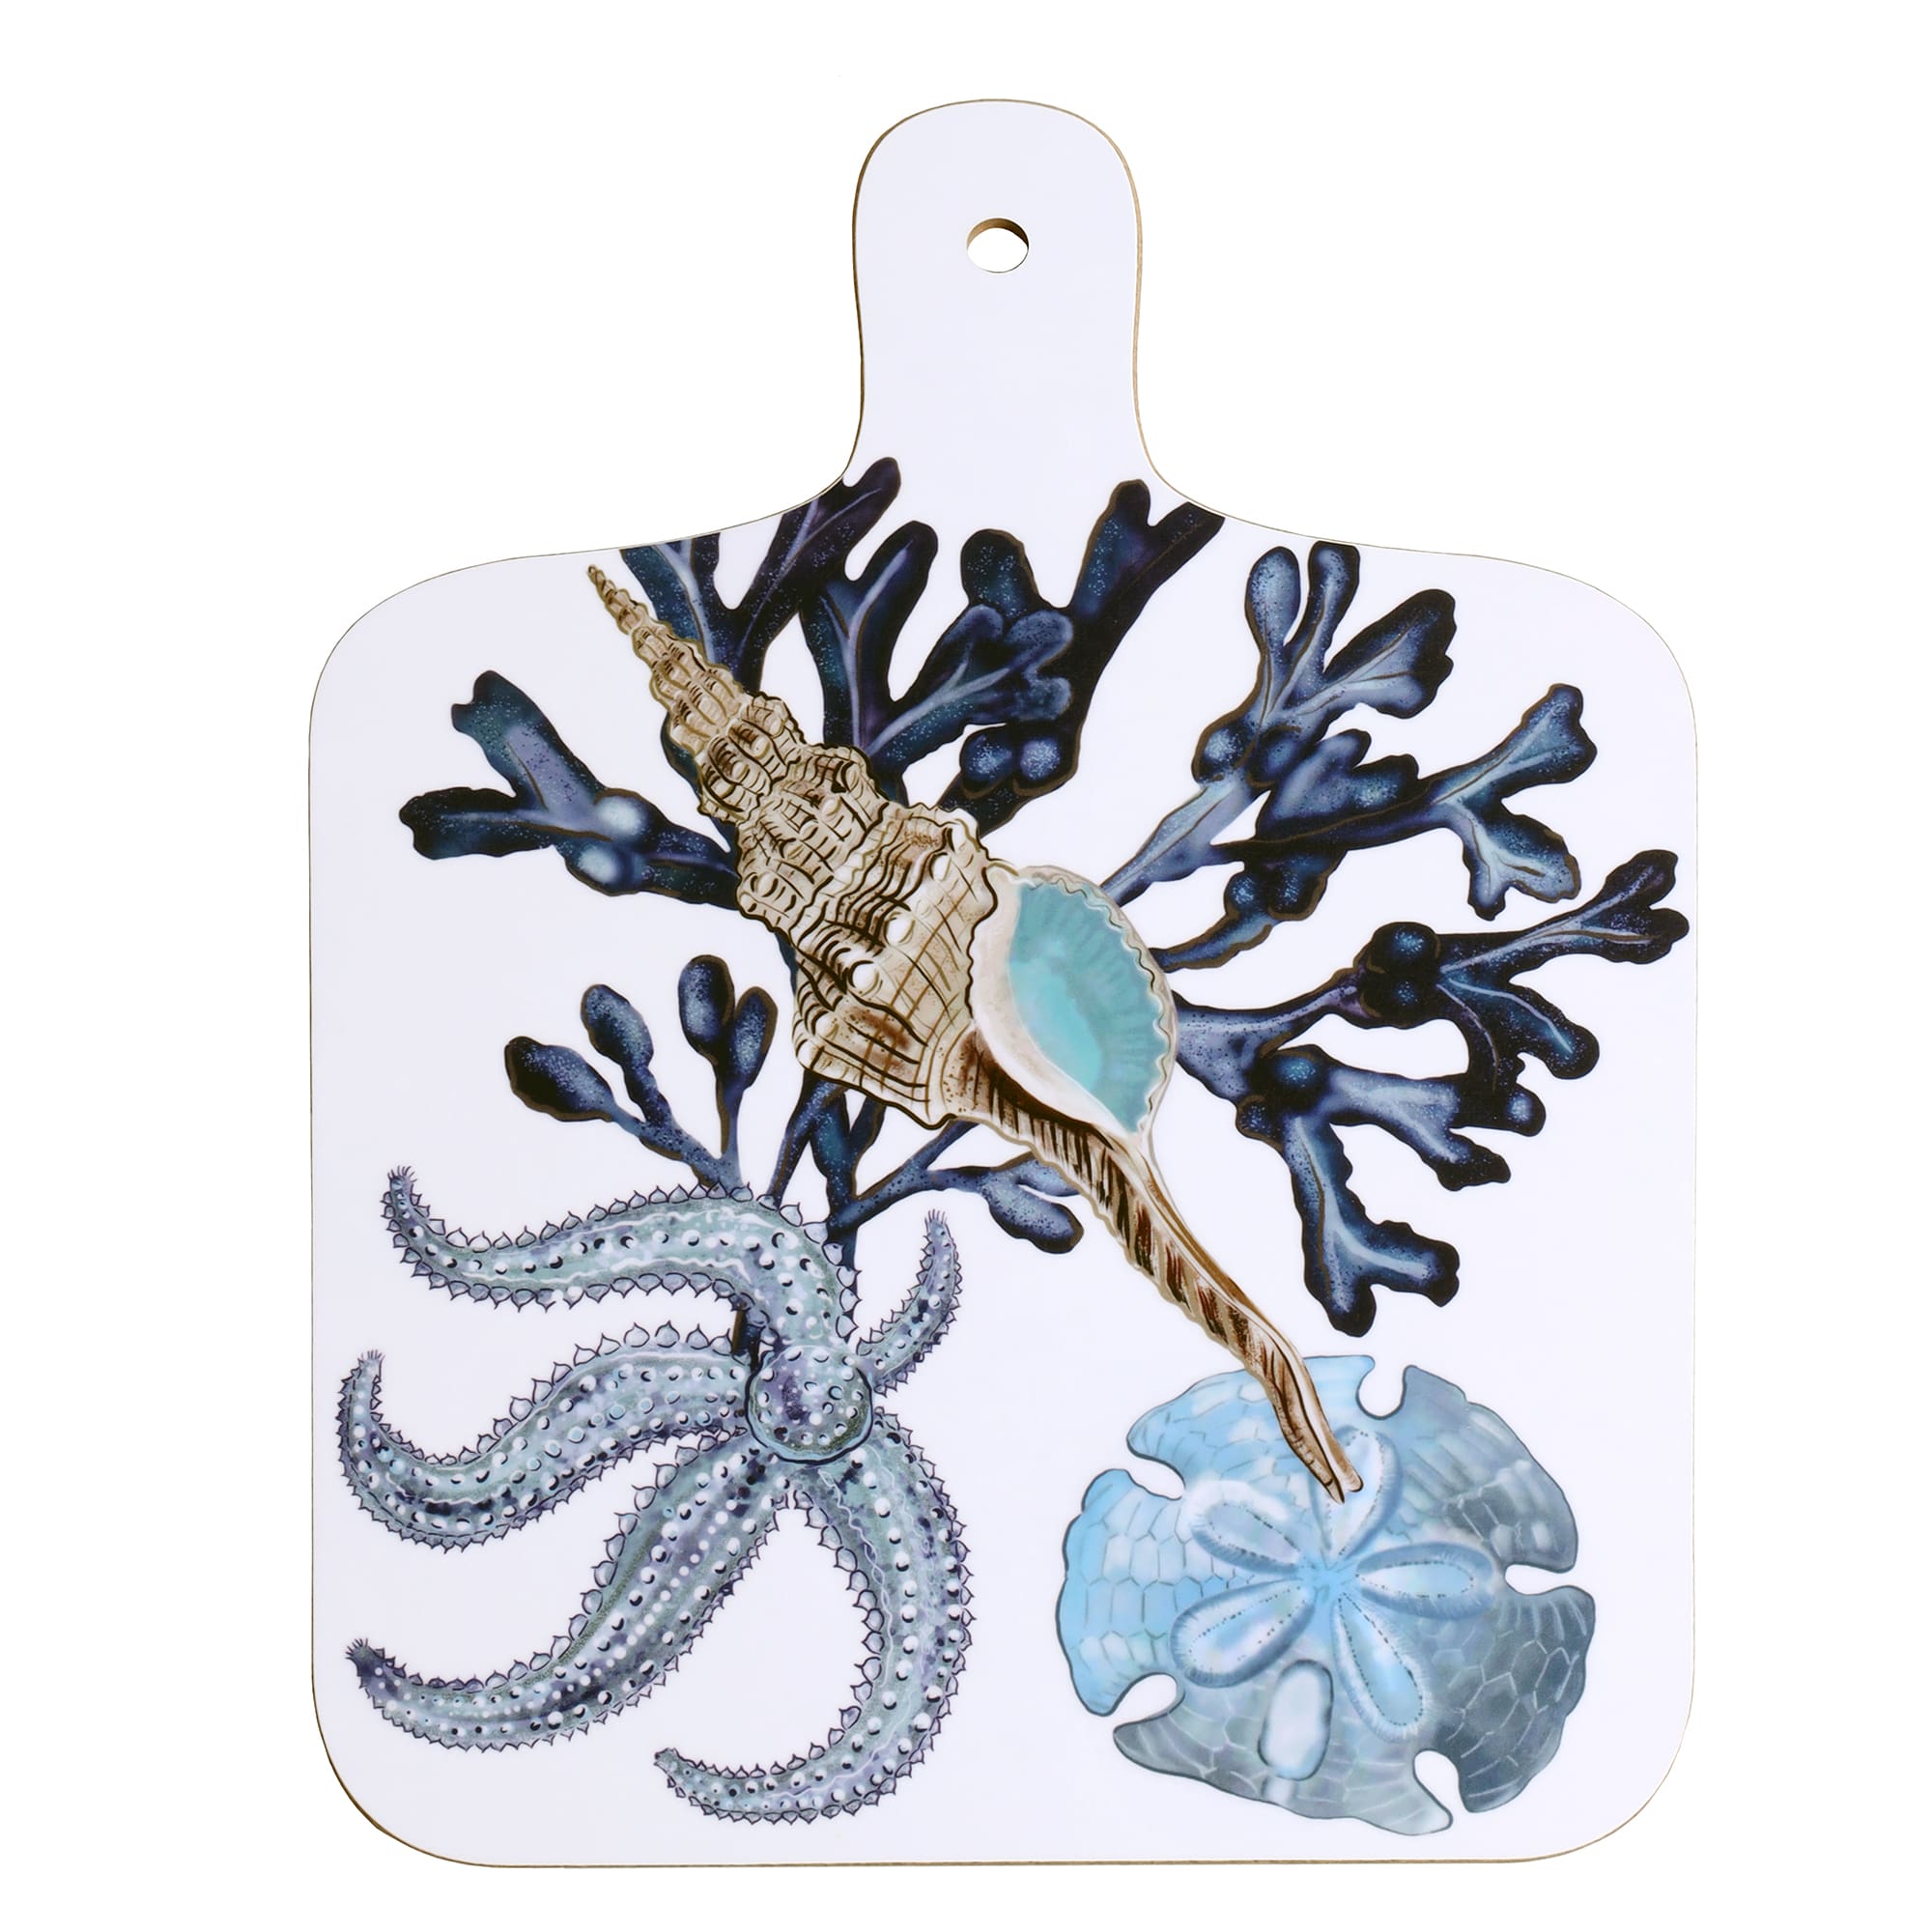 Beachcomber design with various shells mini chopping board